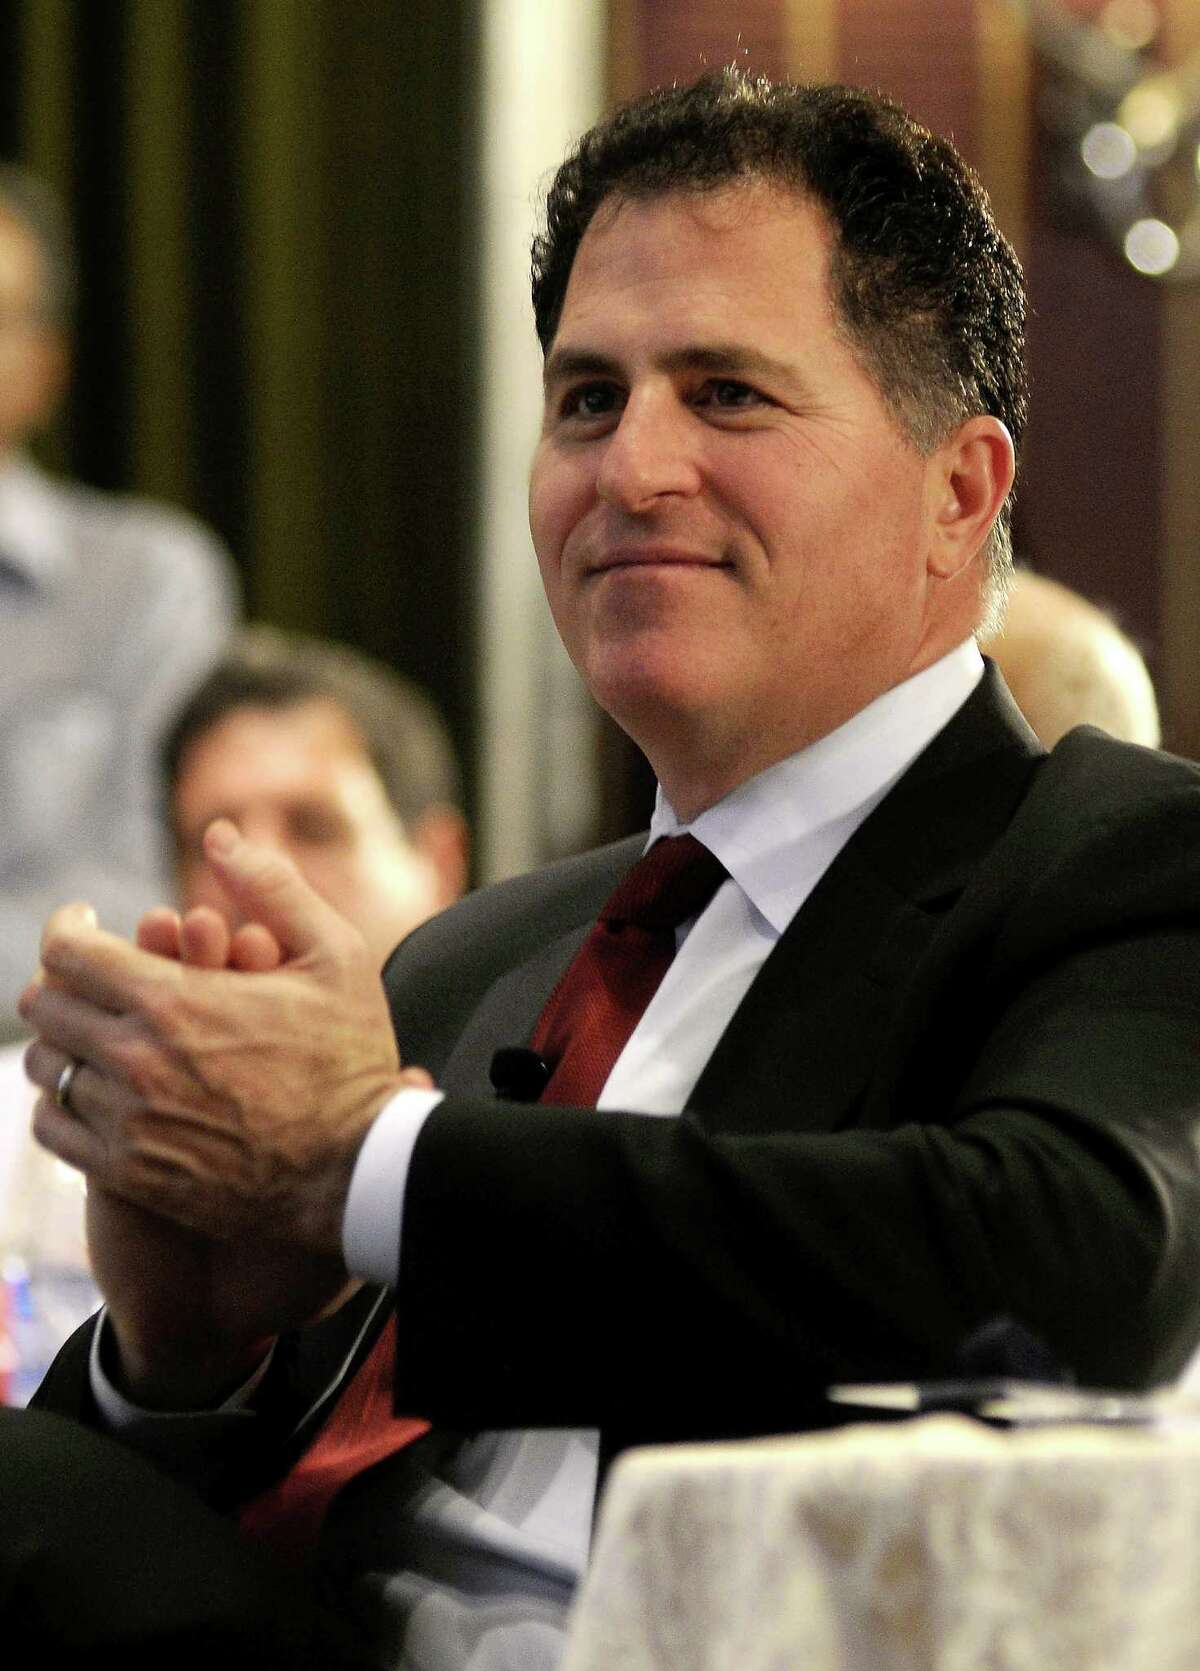 (FILES) CEO of Dell Inc, Michael Dell applauds after a speaker's address while taking part in an interactive session organised by the Confederation of Indian Industries (CII) in Bangalore in this Januray 9, 2012 file photo. A special committee of Dell's board studying a sale of the computer giant said June 5, 2013 the alternative plan from corporate raider Carl Icahn is underfunded by as much as $3.9 billion. The panel, which has set a shareholder vote for July 18, offered a detailed explanation of its support for a private equity buyout led by company founder Michael Dell worth $24.4 billion. In a statement and a a regulatory filing, the panel said the private equity deal "is the best option for shareholders, including the superior value and certainty it provides relative to all alternatives evaluated and its shifting of Dell's business risks to the buyer group." AFP PHOTO/STRSTRDEL/AFP/Getty Images